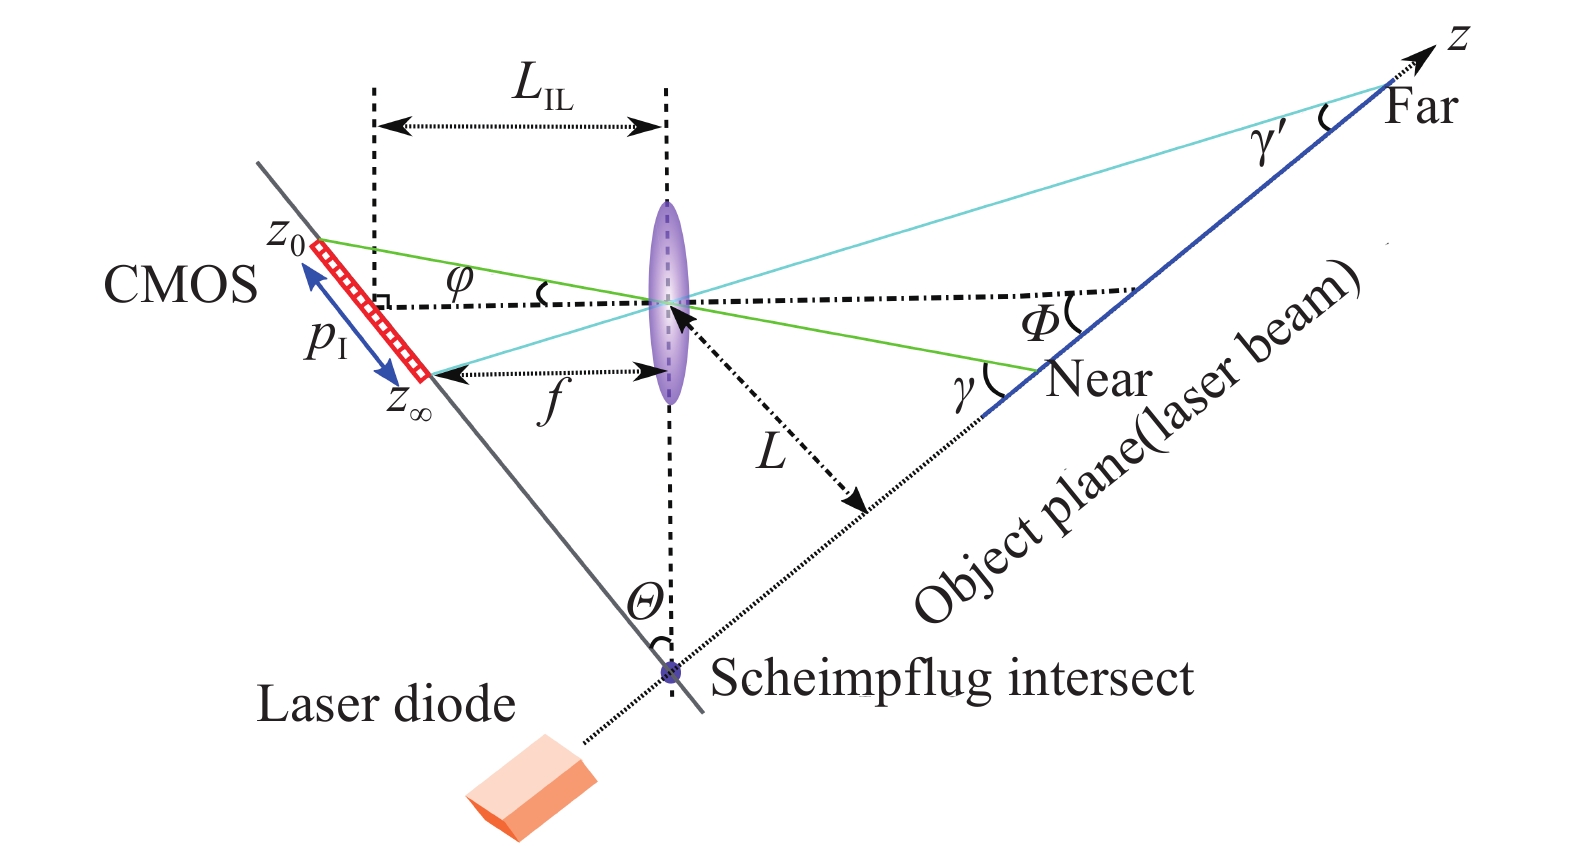 Optical layout of the Scheimpflug imaging principle. is the focal length of the receiving telescope沙氏成像原理示意图。f是接收望远镜的焦距